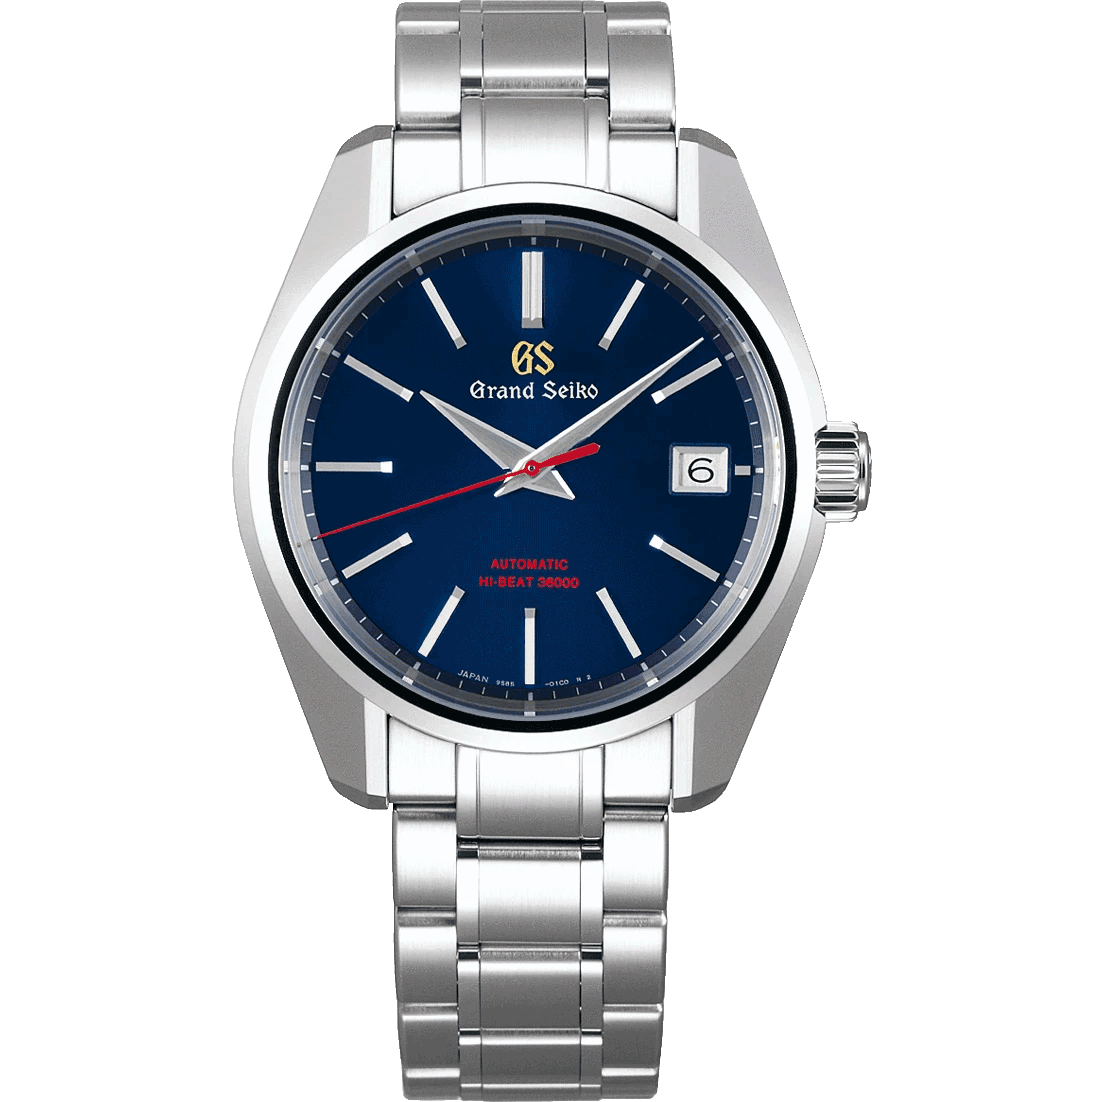 Grand Seiko 60th AnniversarySBGH281 Automatic Hi-Beat 36000 blue dial 44GS stainless steel men's watches